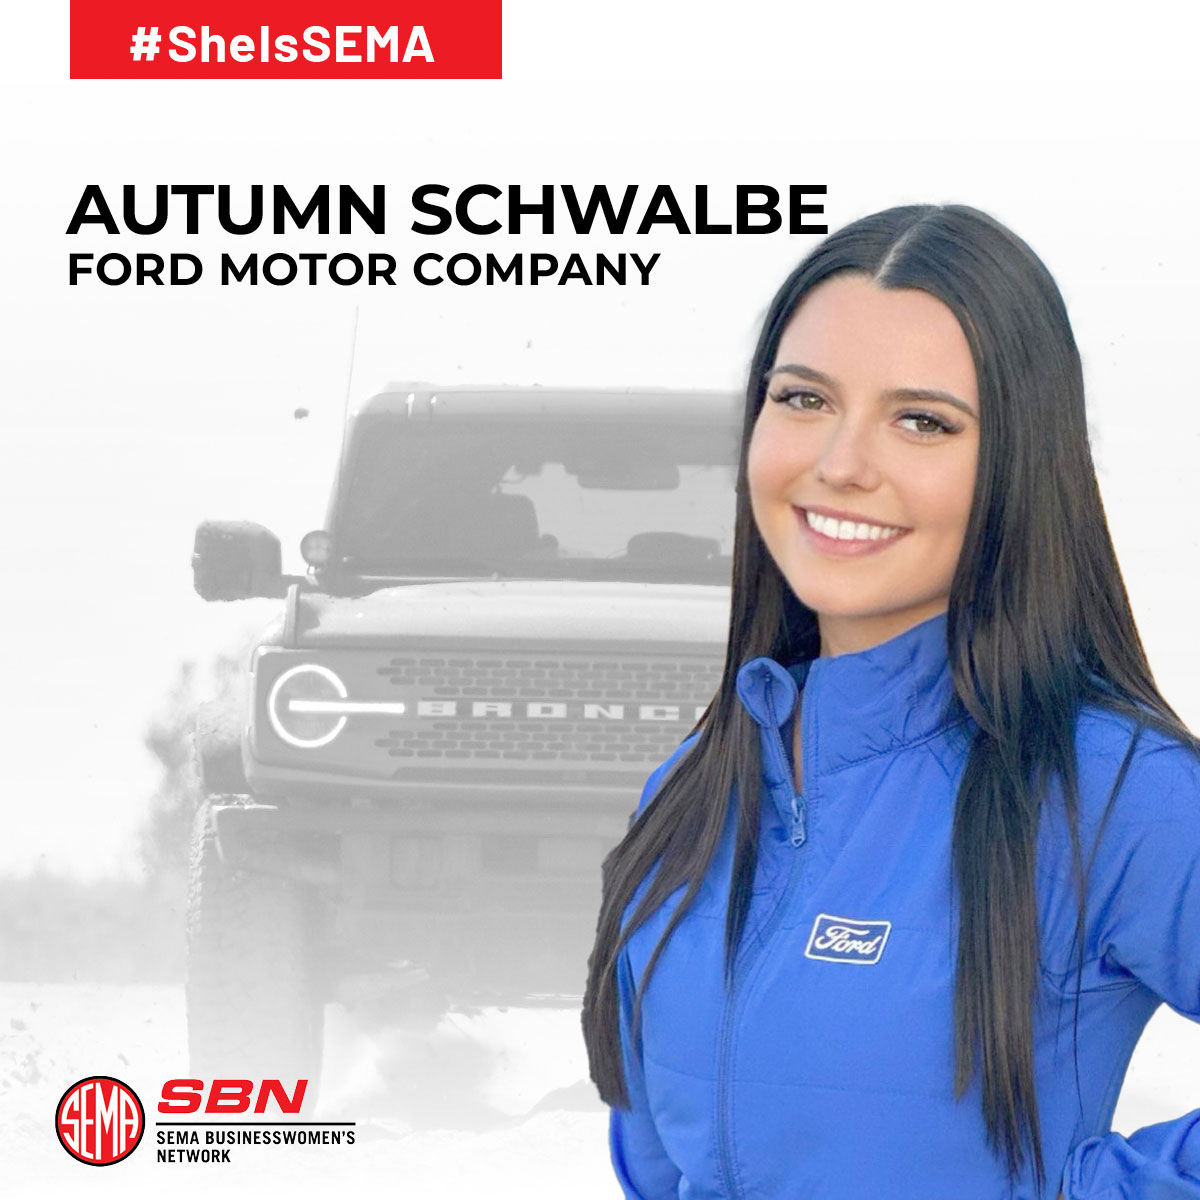 SheIsSEMA Spotlight: Autumn Schwalbe of Ford Motor Company Brings New Perspective to Role